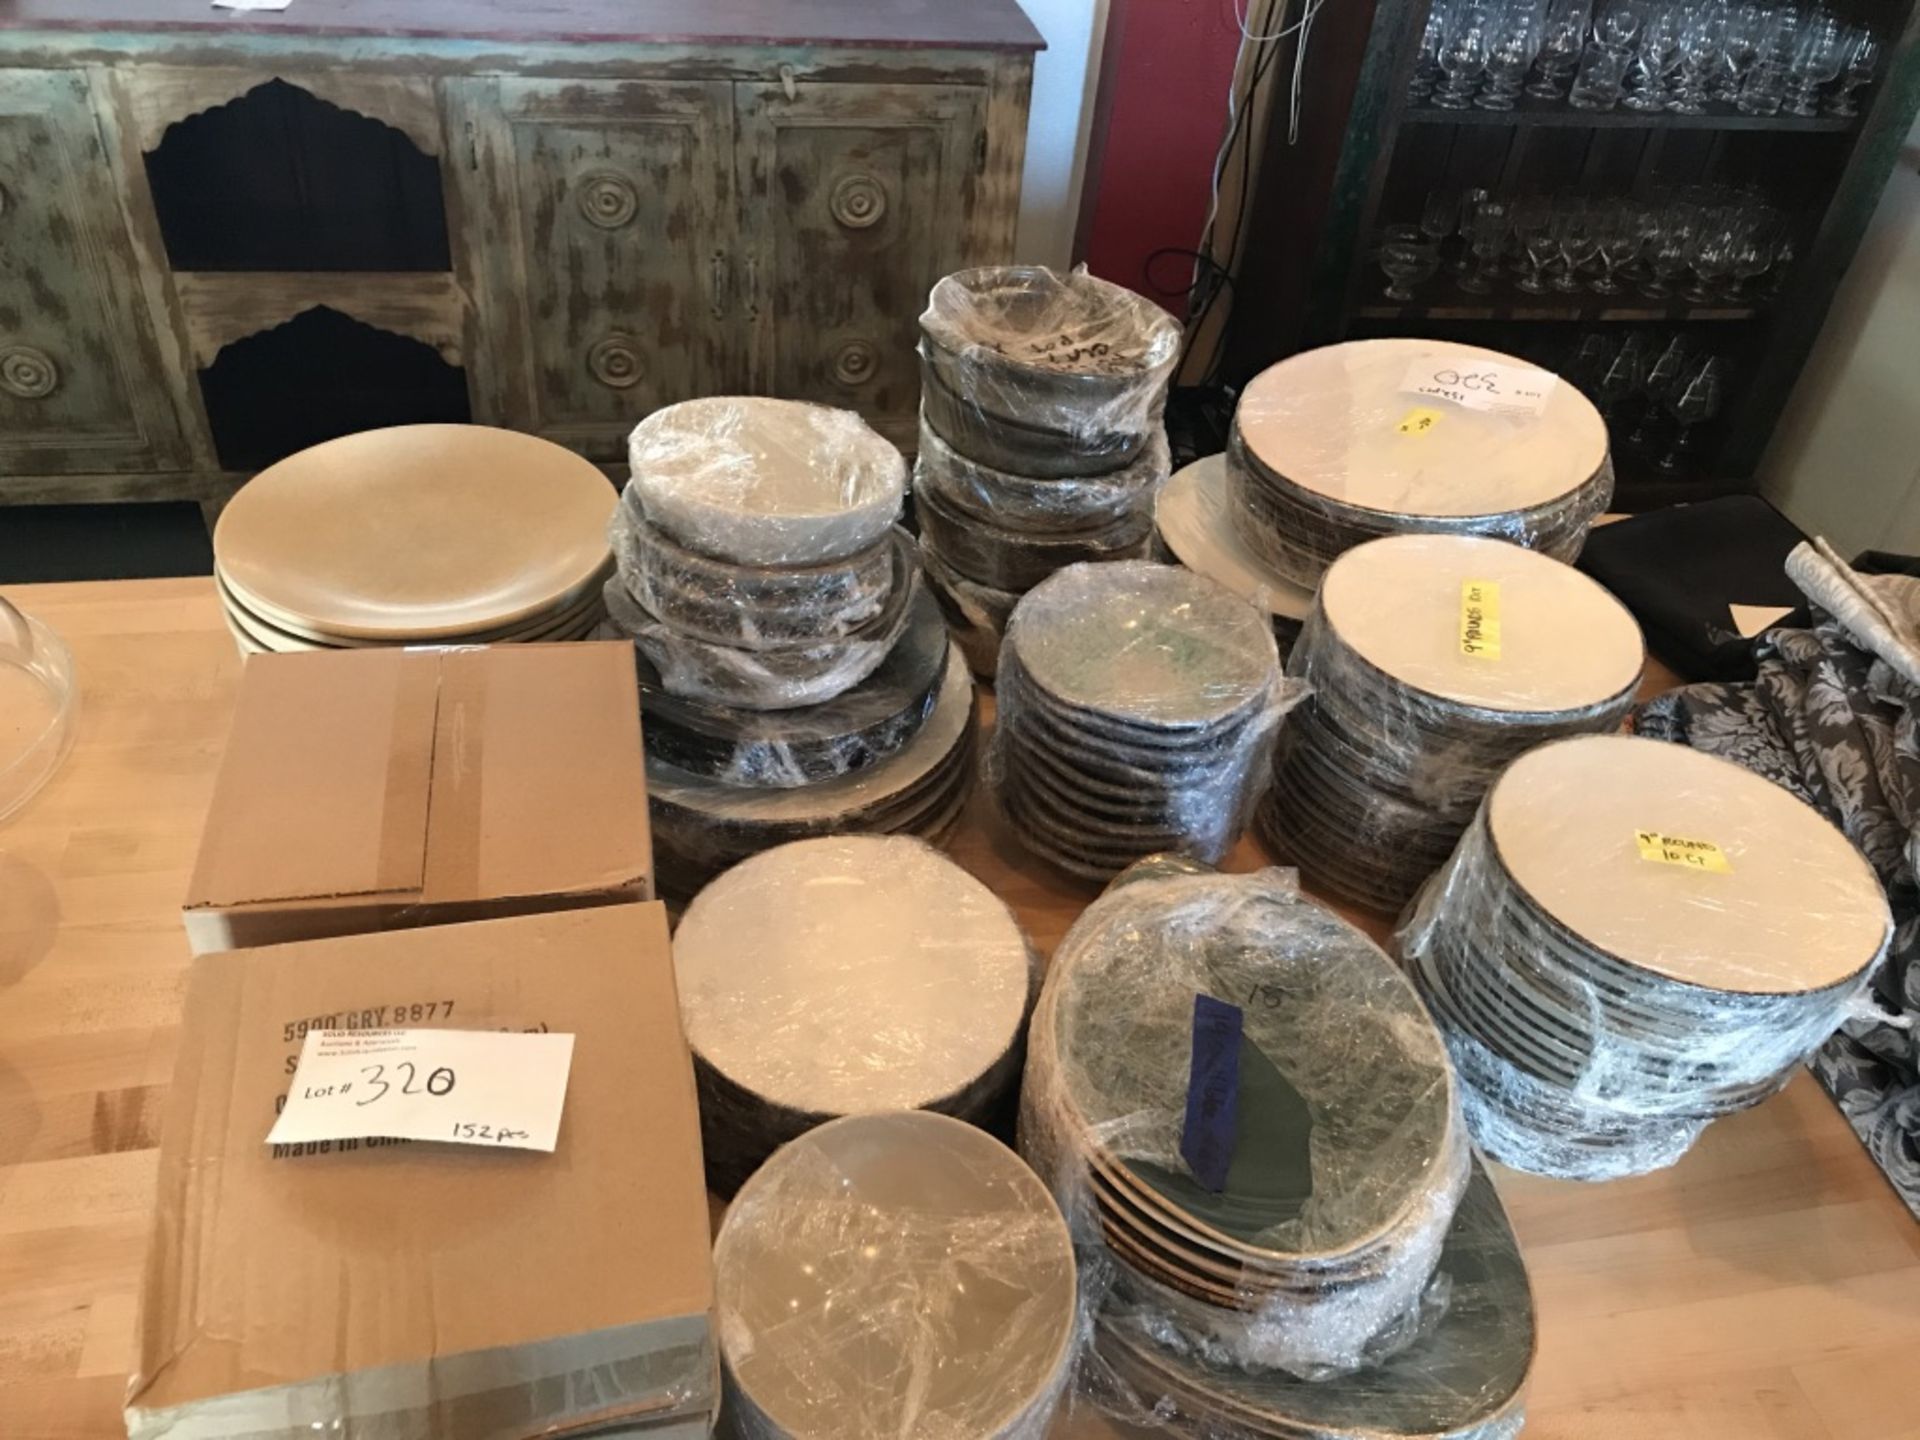 LOT OF: (152) VARIOUS DISHES TO INCLUDE: CLAY POTS, PLATES, BOWLS - Image 2 of 12